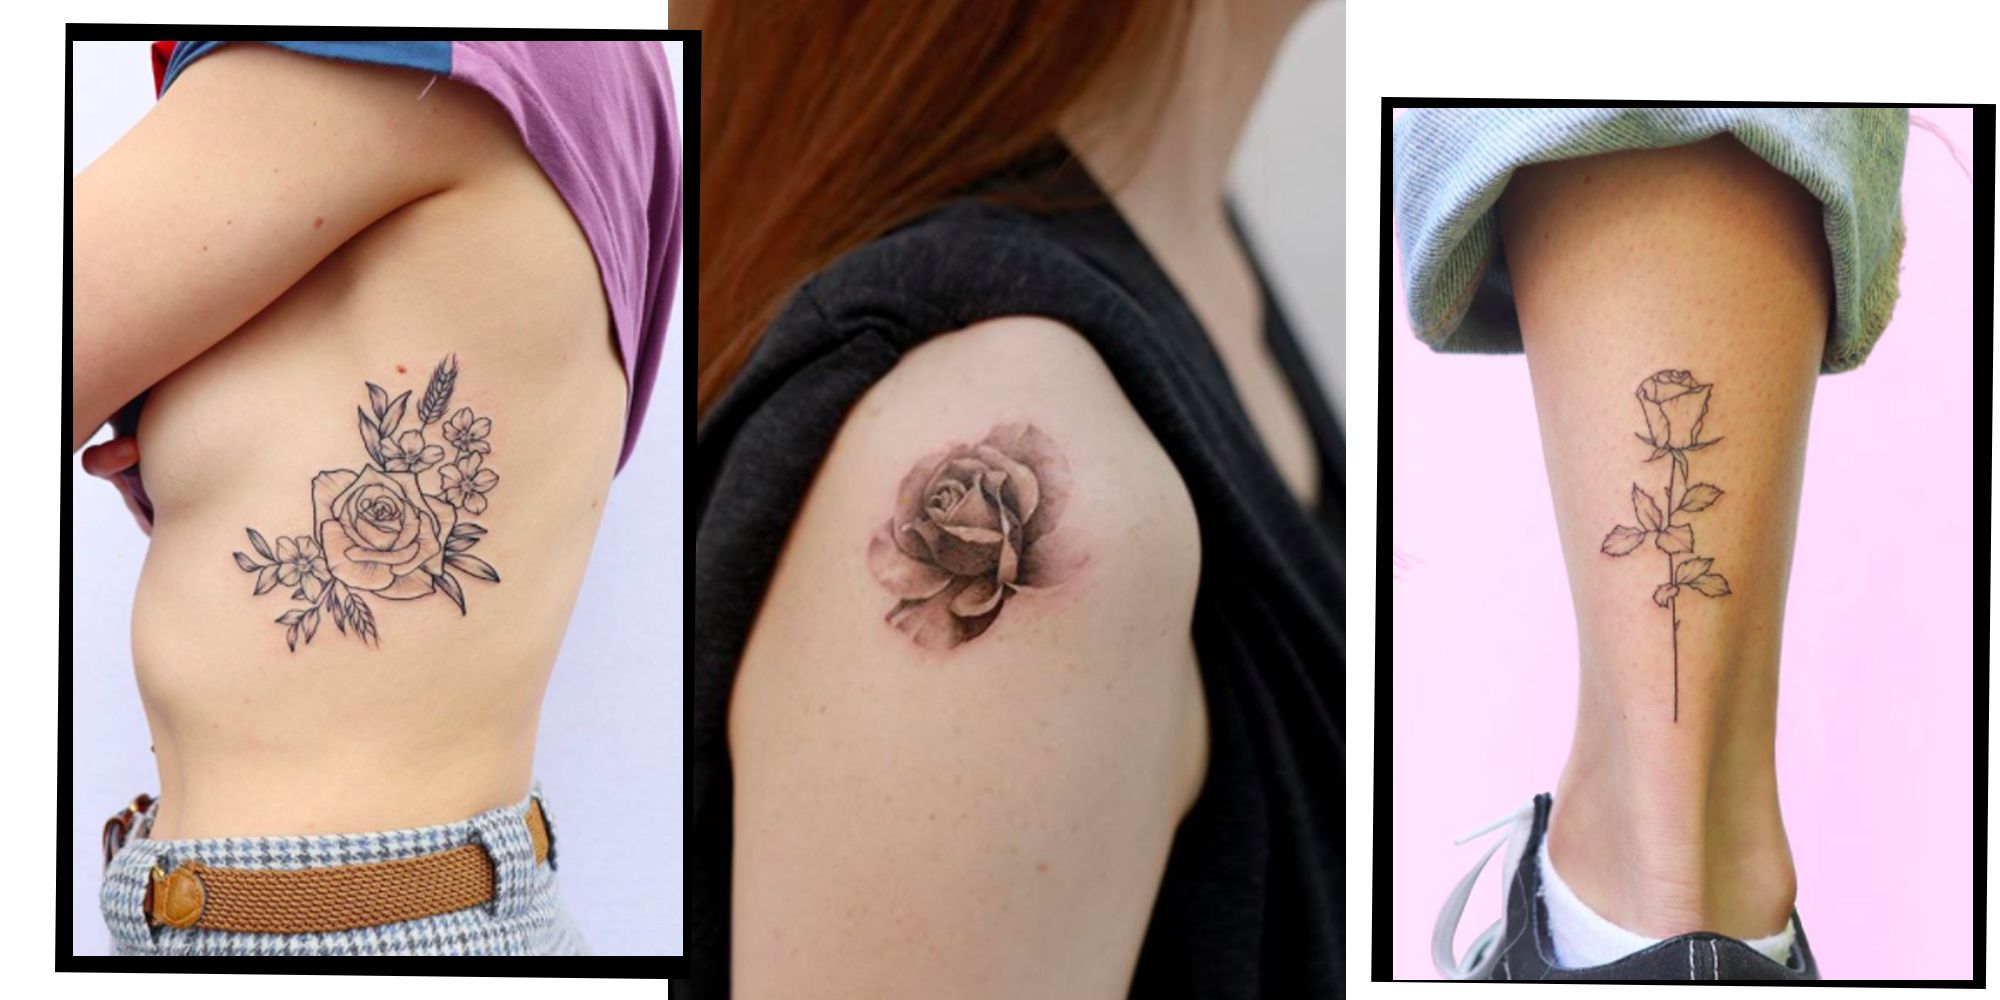 93831 Rose Tattoo Images Stock Photos  Vectors  Shutterstock